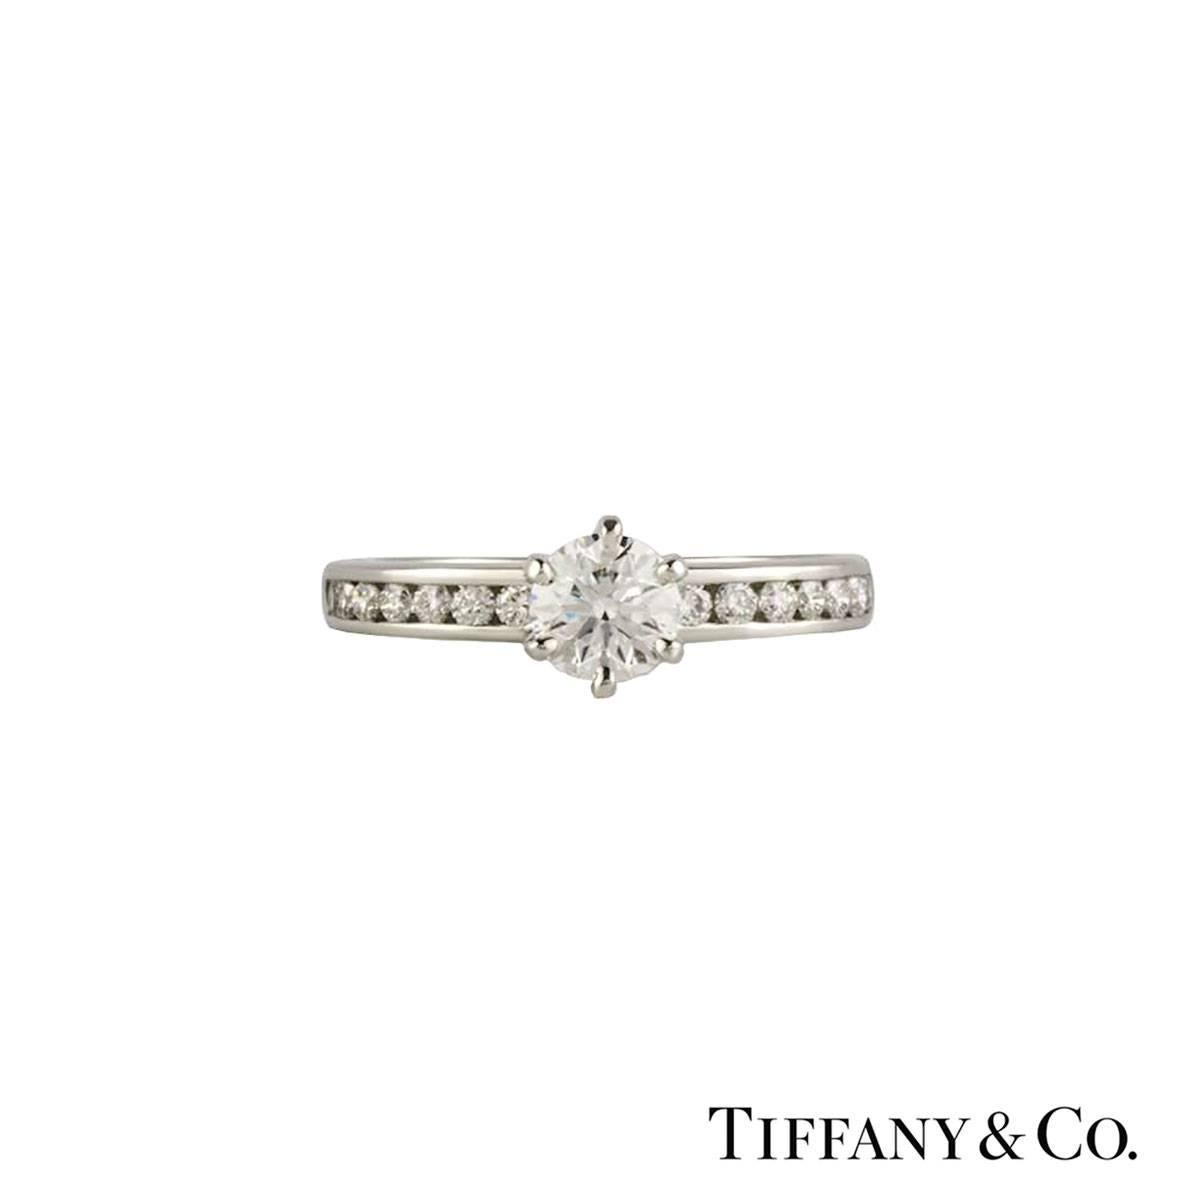 A beautiful Tiffany & Co. diamond engagement ring from The Tiffany Setting with Diamond Band collection. The ring comprises of a round brilliant cut diamonds in a prong setting with a weight of 0.33ct, G colour and VS1 clarity. The ring features 7